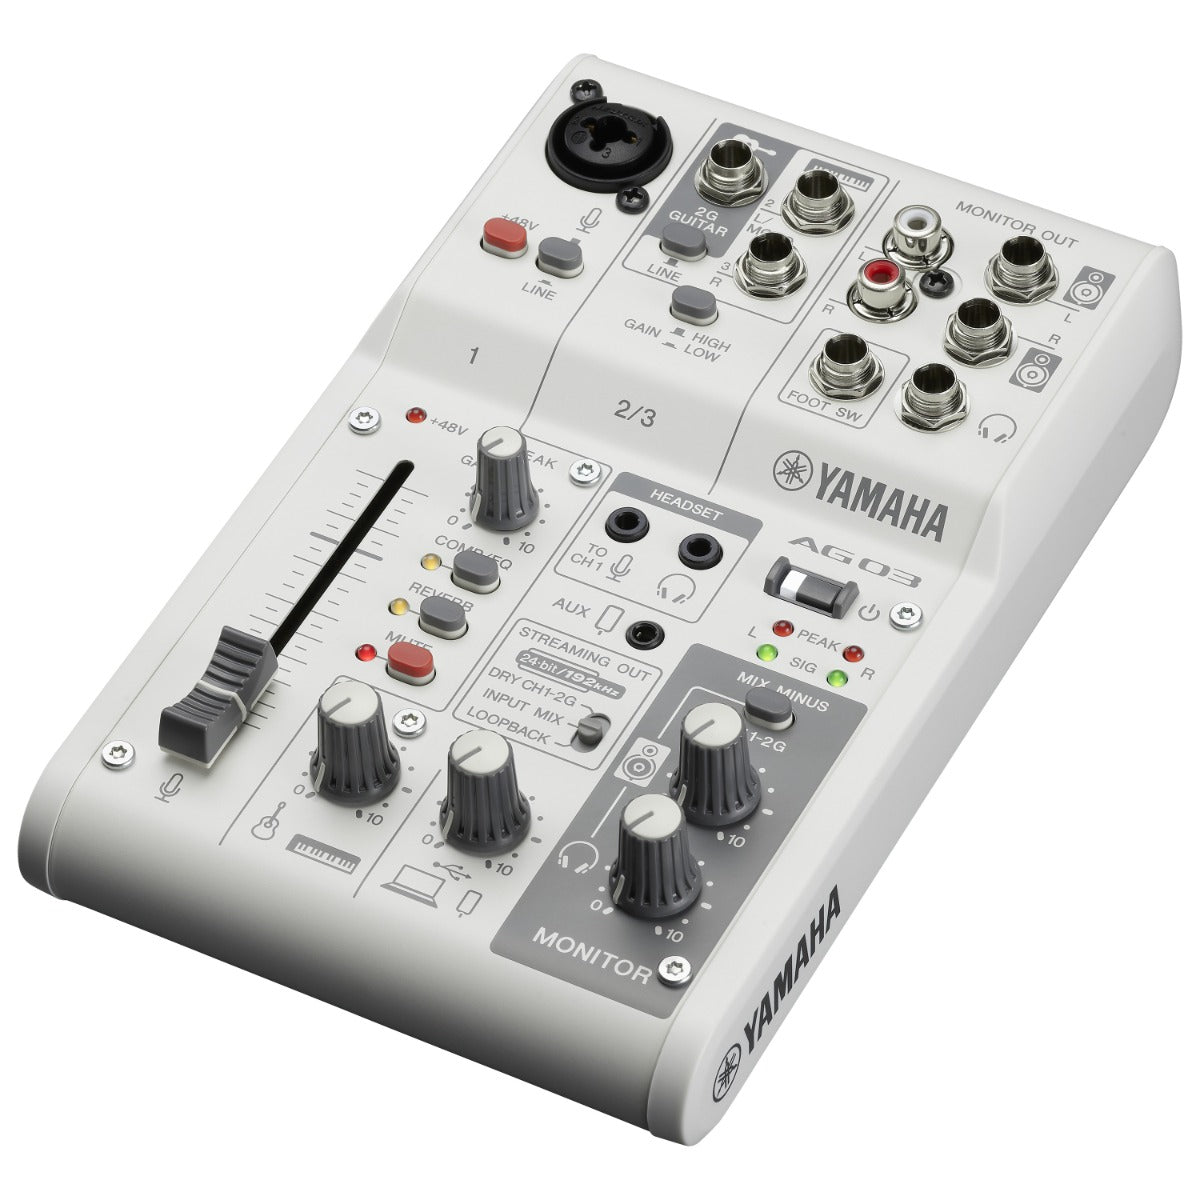 Yamaha AG03 MK2 Live Streaming Mixer and Interface - White view 1